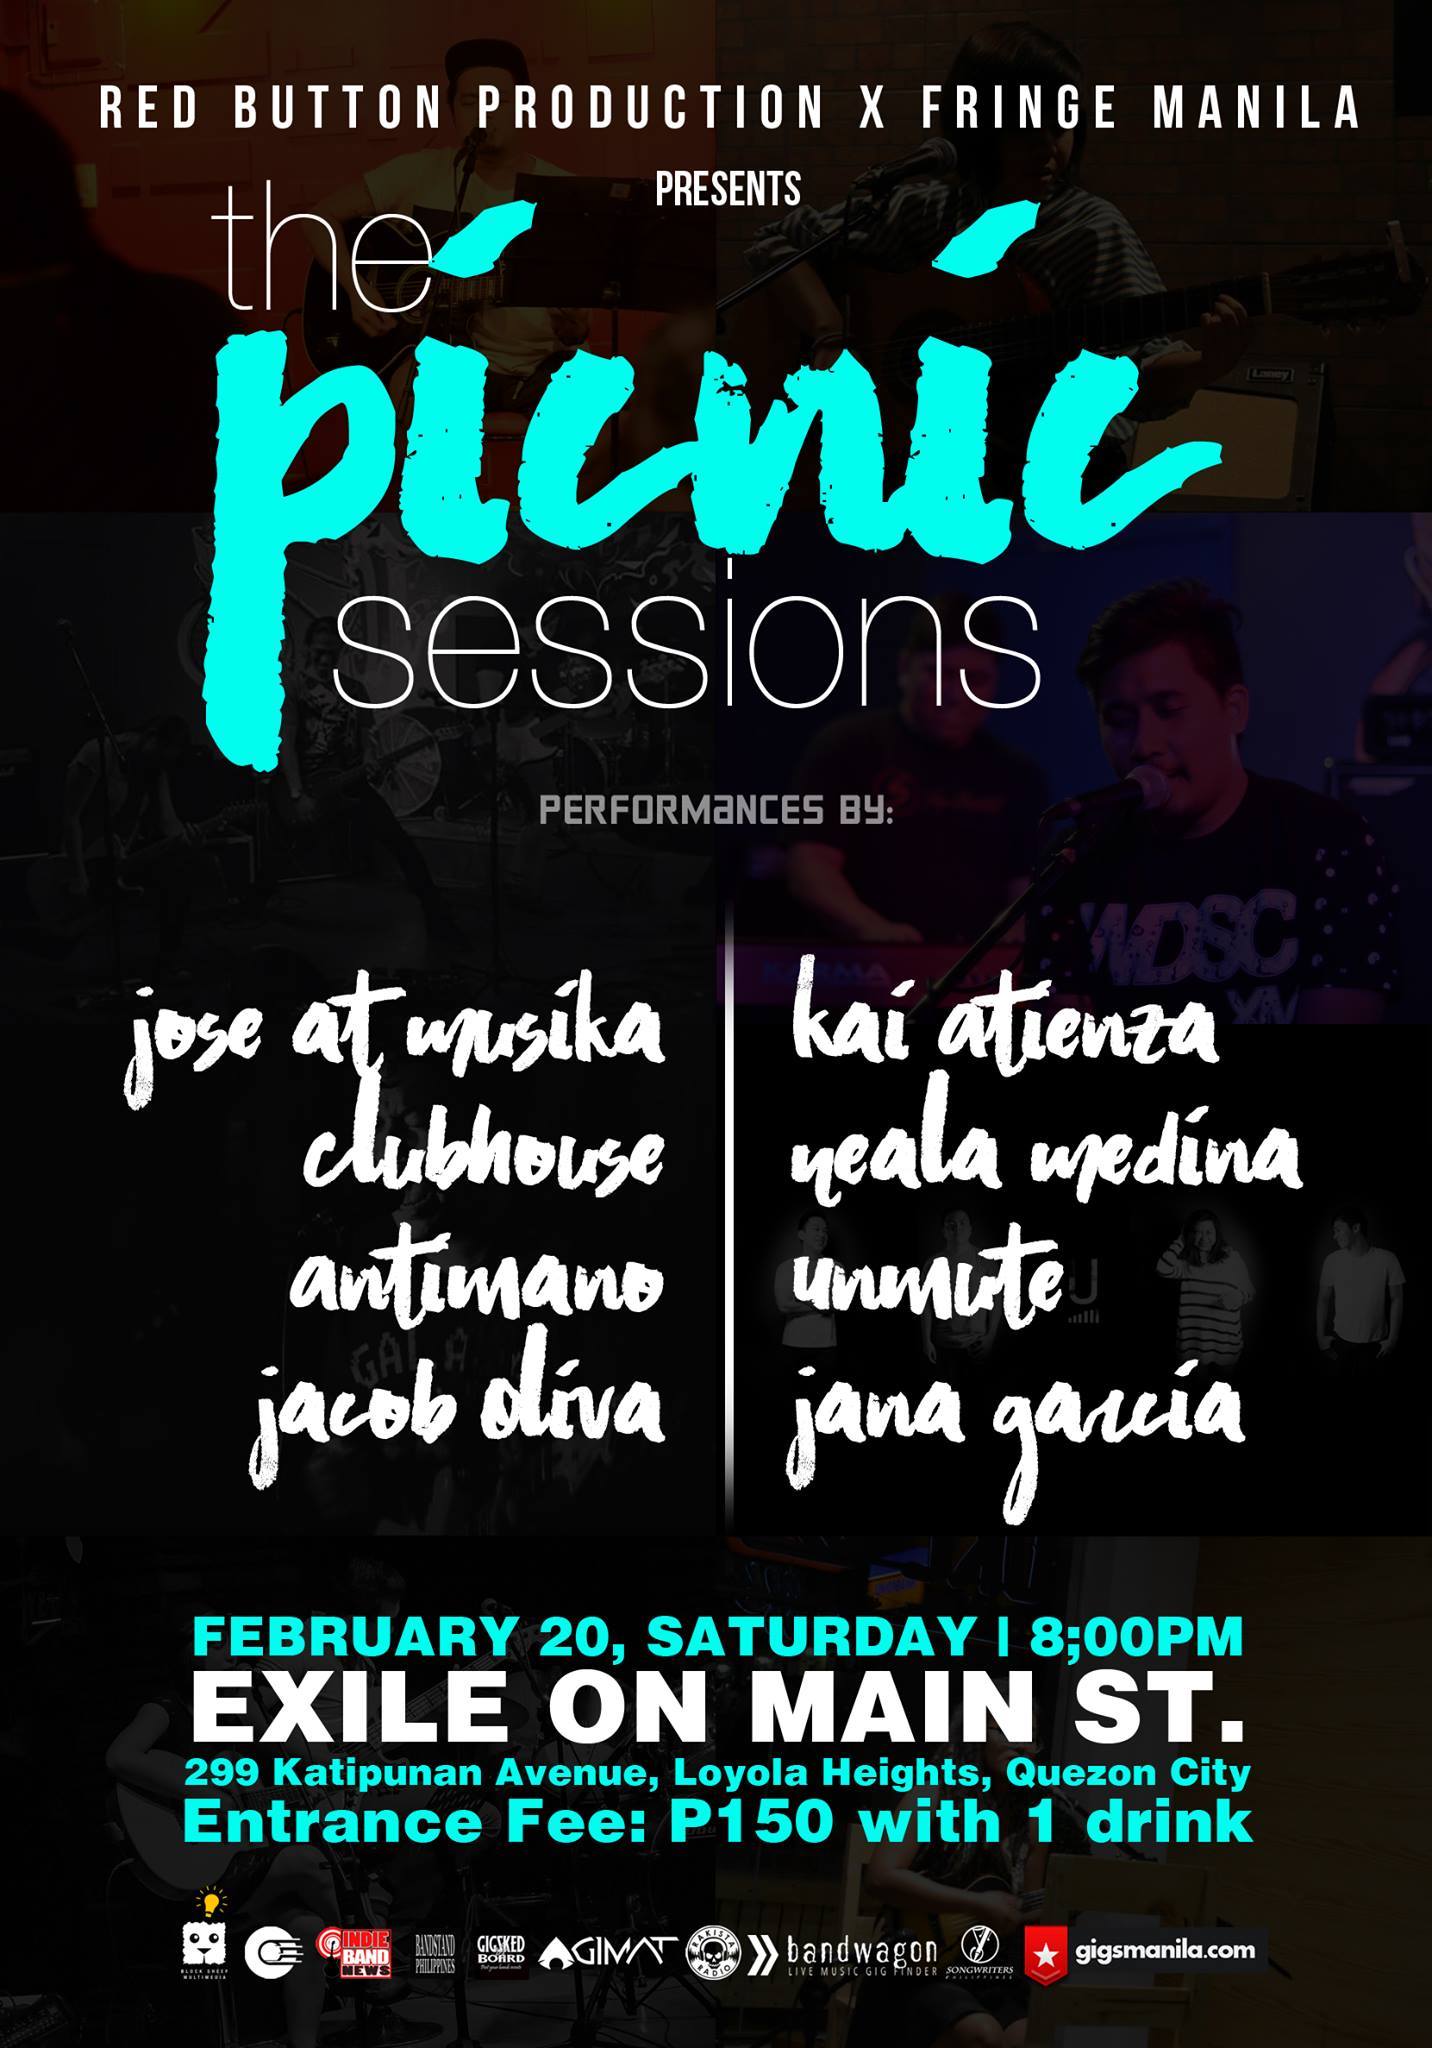 The Picnic Sessions clock February 20 - February 21 Feb 20 at 7 AM to Feb 21 at 1 AM pin Show Map Exile on Main St. Katipunan Avenue, Loyola Heights, Quezon City, Philippines Red Button Production x FringeMNL presents: "The Picnic Sessions February 20, Saturday | 8;00PM Exile On Main St. 299 Katipunan Avenue, Loyola Heights, Quezon City Entrance Fee: P150 with 1 drink performances by: Jose at Musika Clubhouse Antimano Jacob Oliva Kai Atienza Neala Medina Unmute Jana Garcia Event Link: https://www.facebook.com/events/917371608370255/